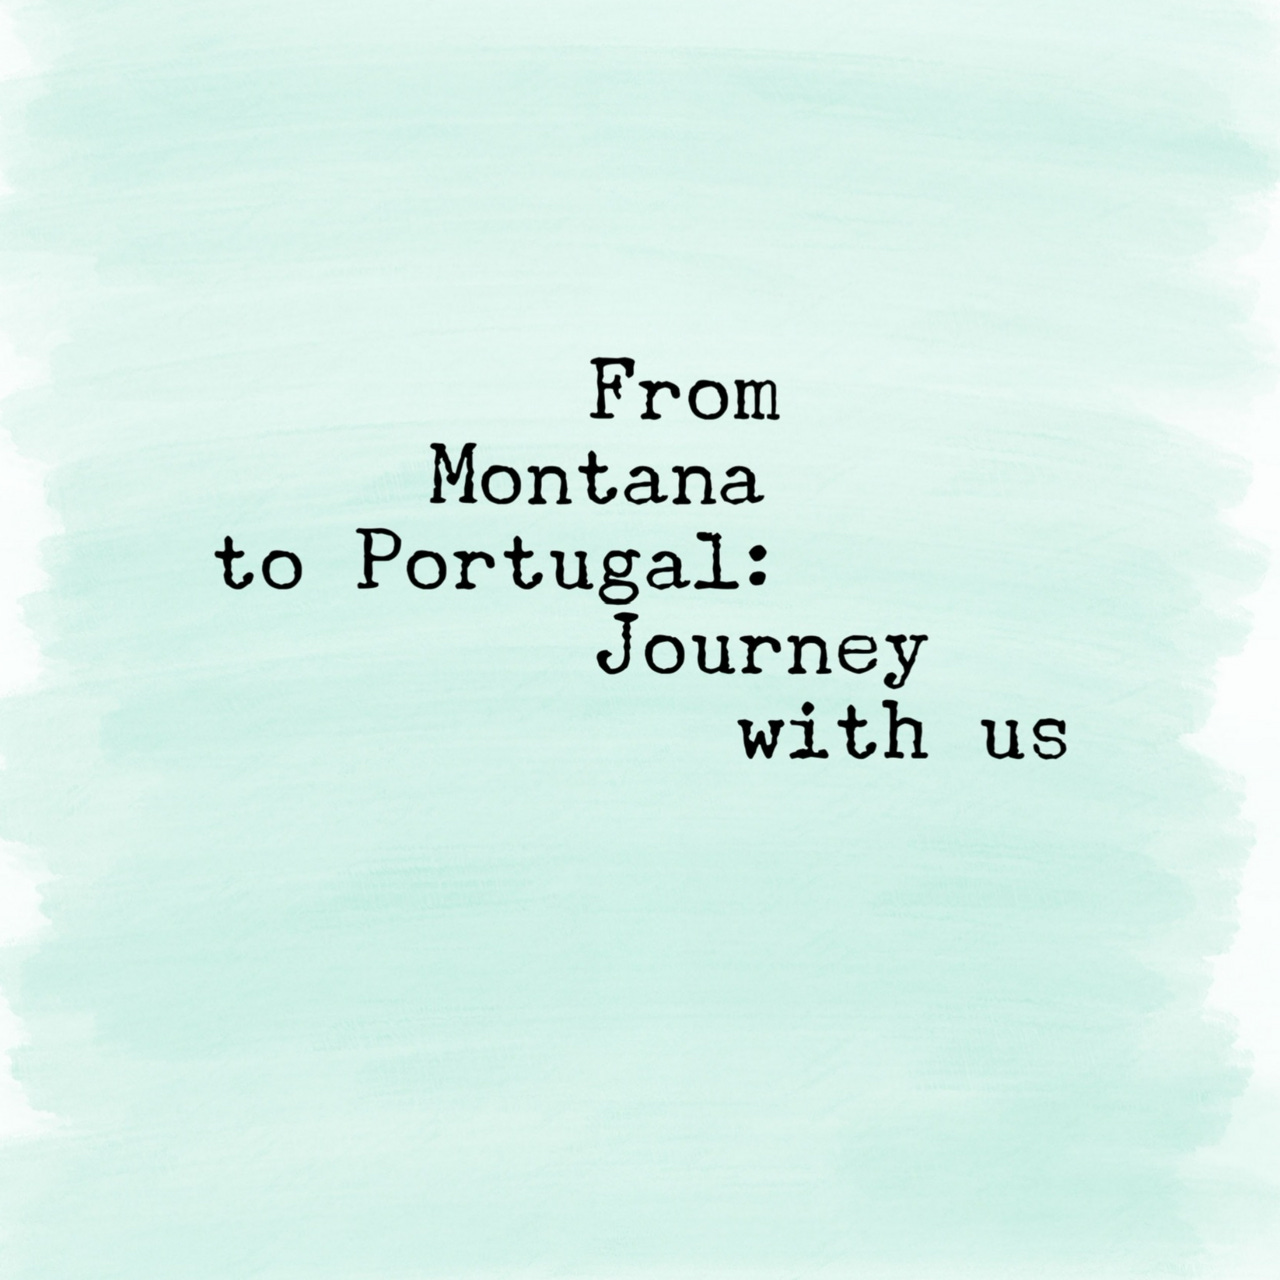 From Montana to Portugal: Journey with Us